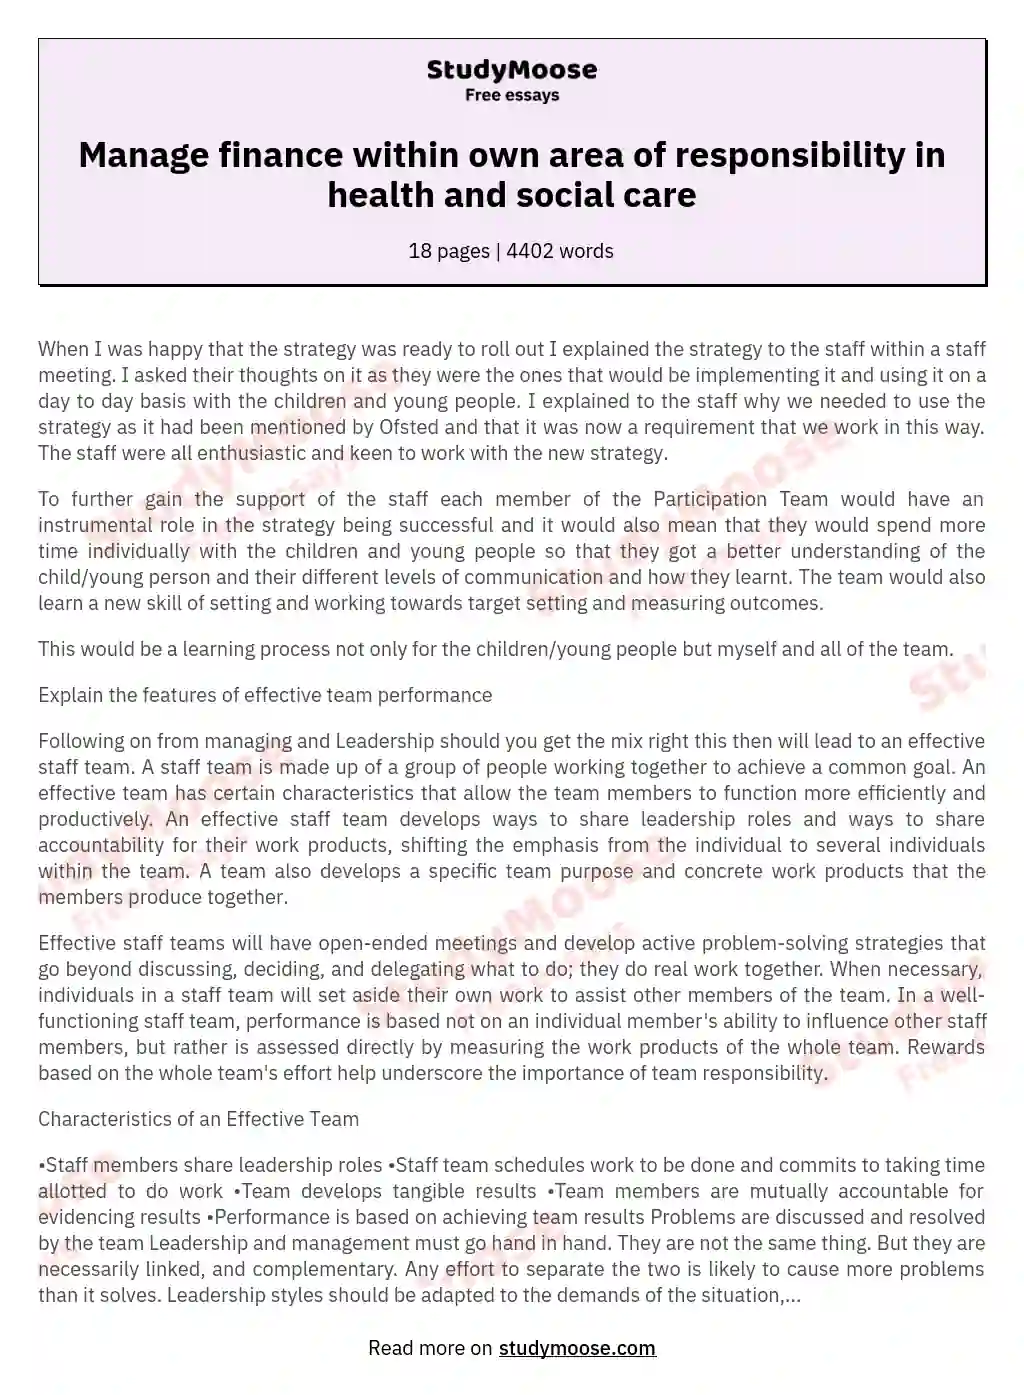 Manage finance within own area of responsibility in health and social care essay